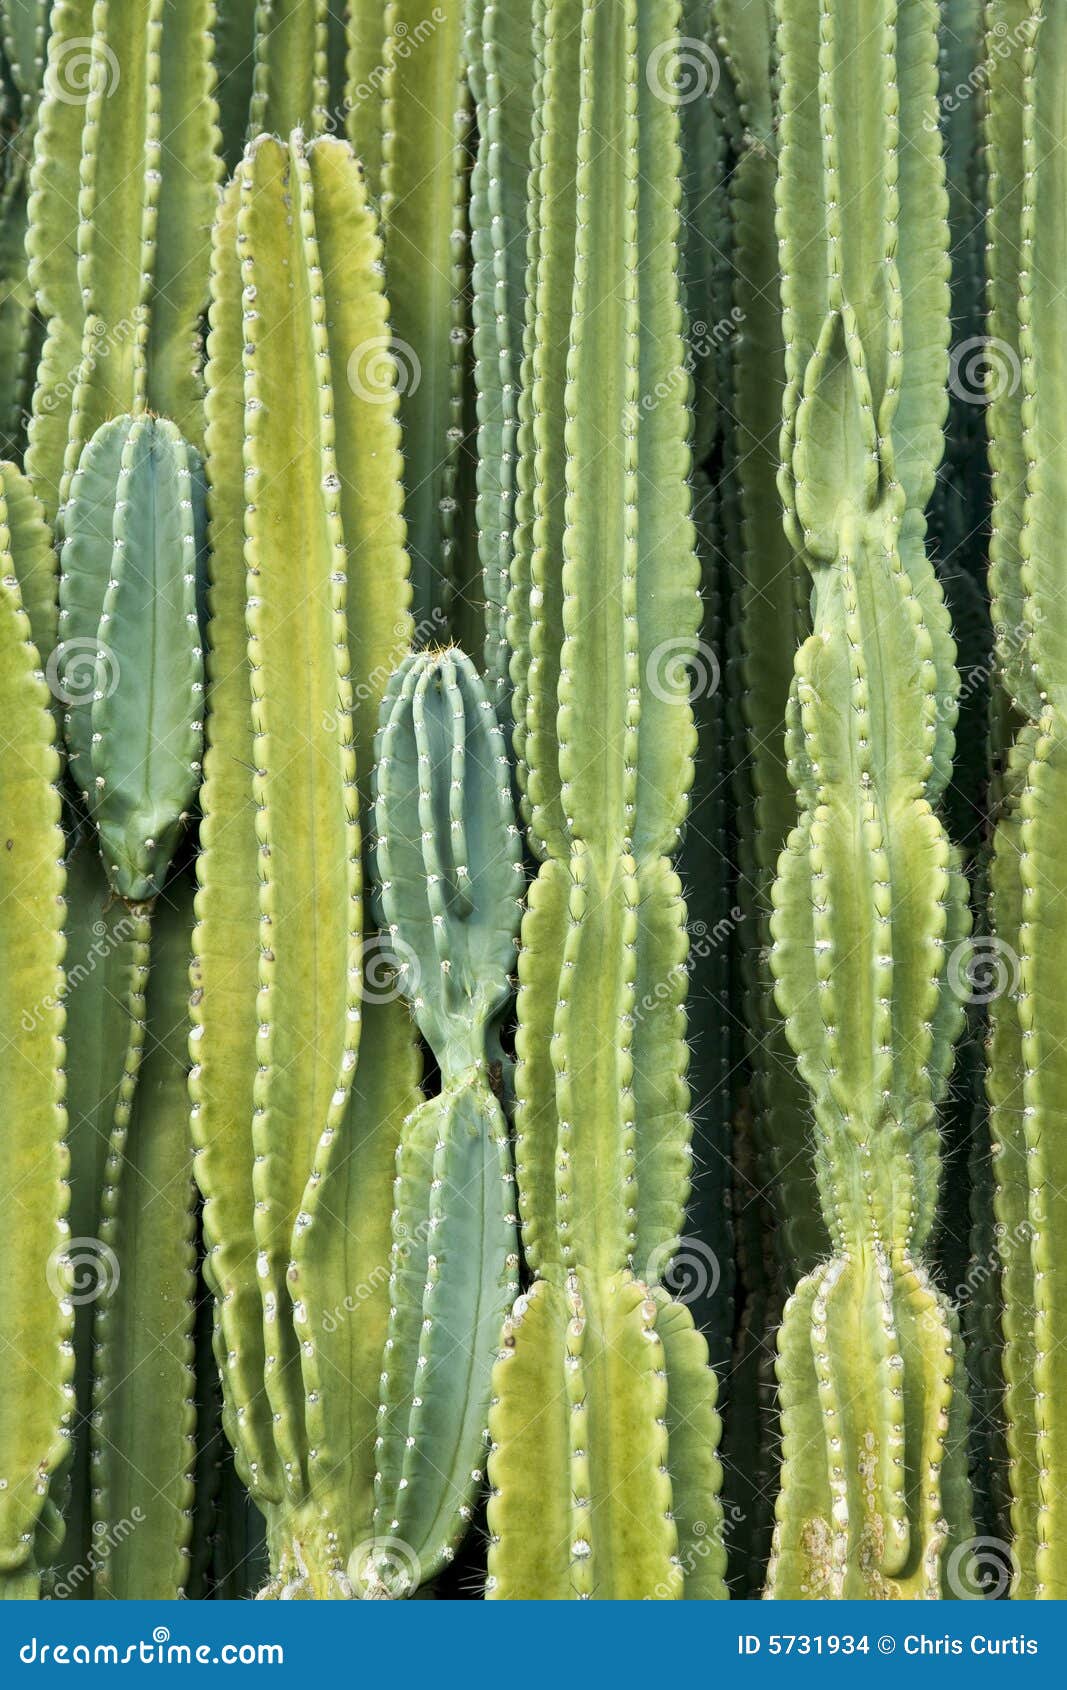 wall of cactus